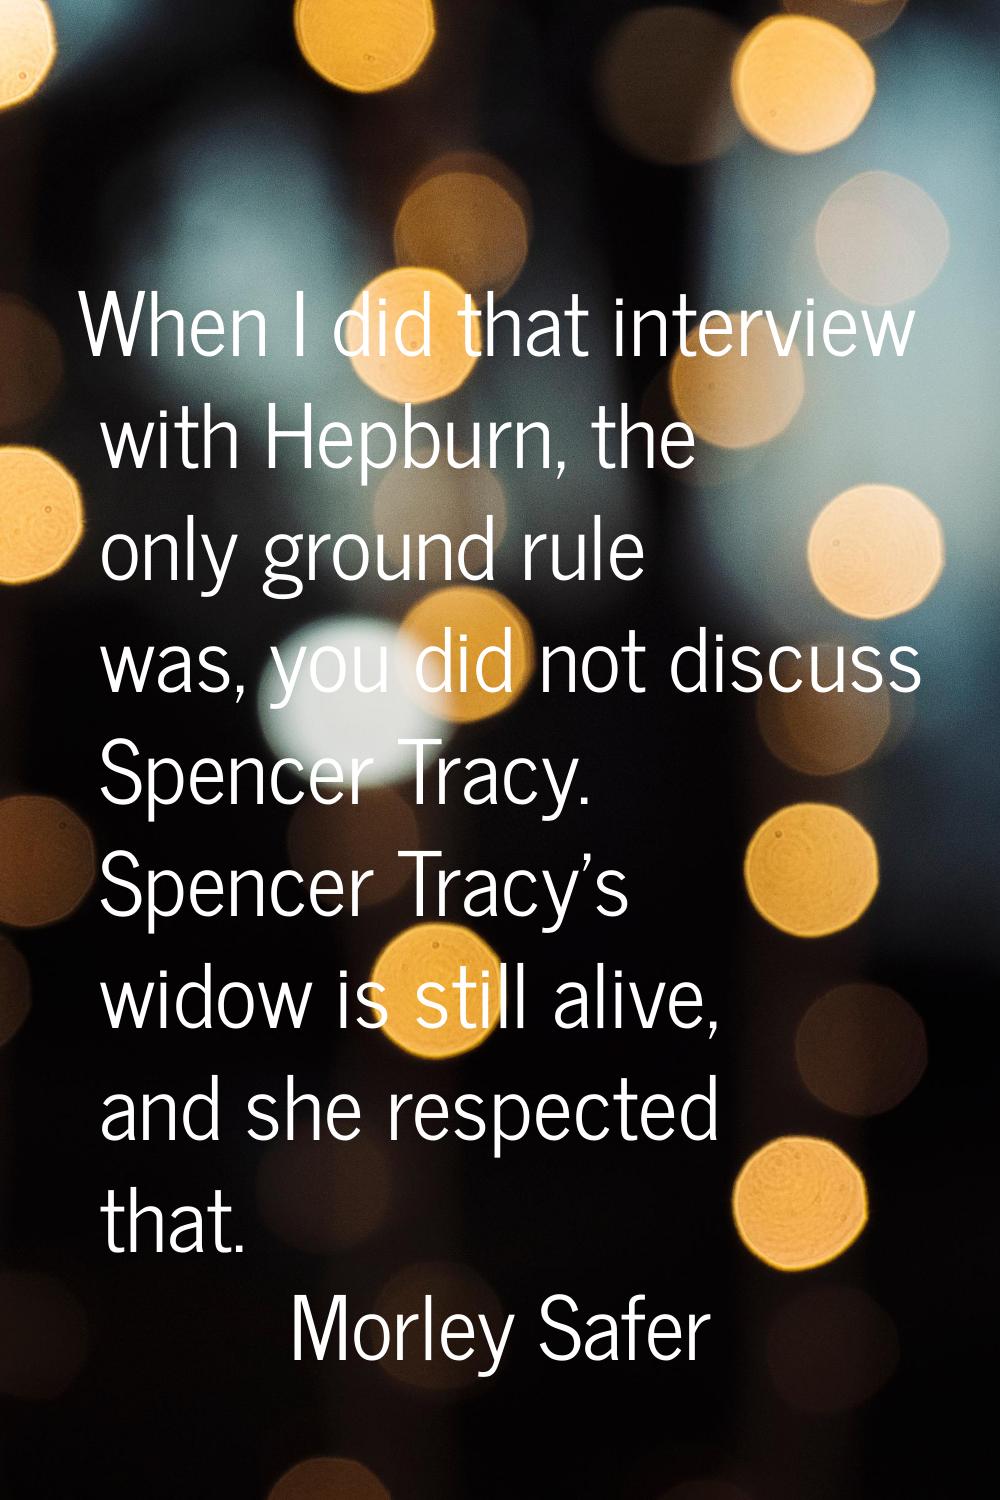 When I did that interview with Hepburn, the only ground rule was, you did not discuss Spencer Tracy